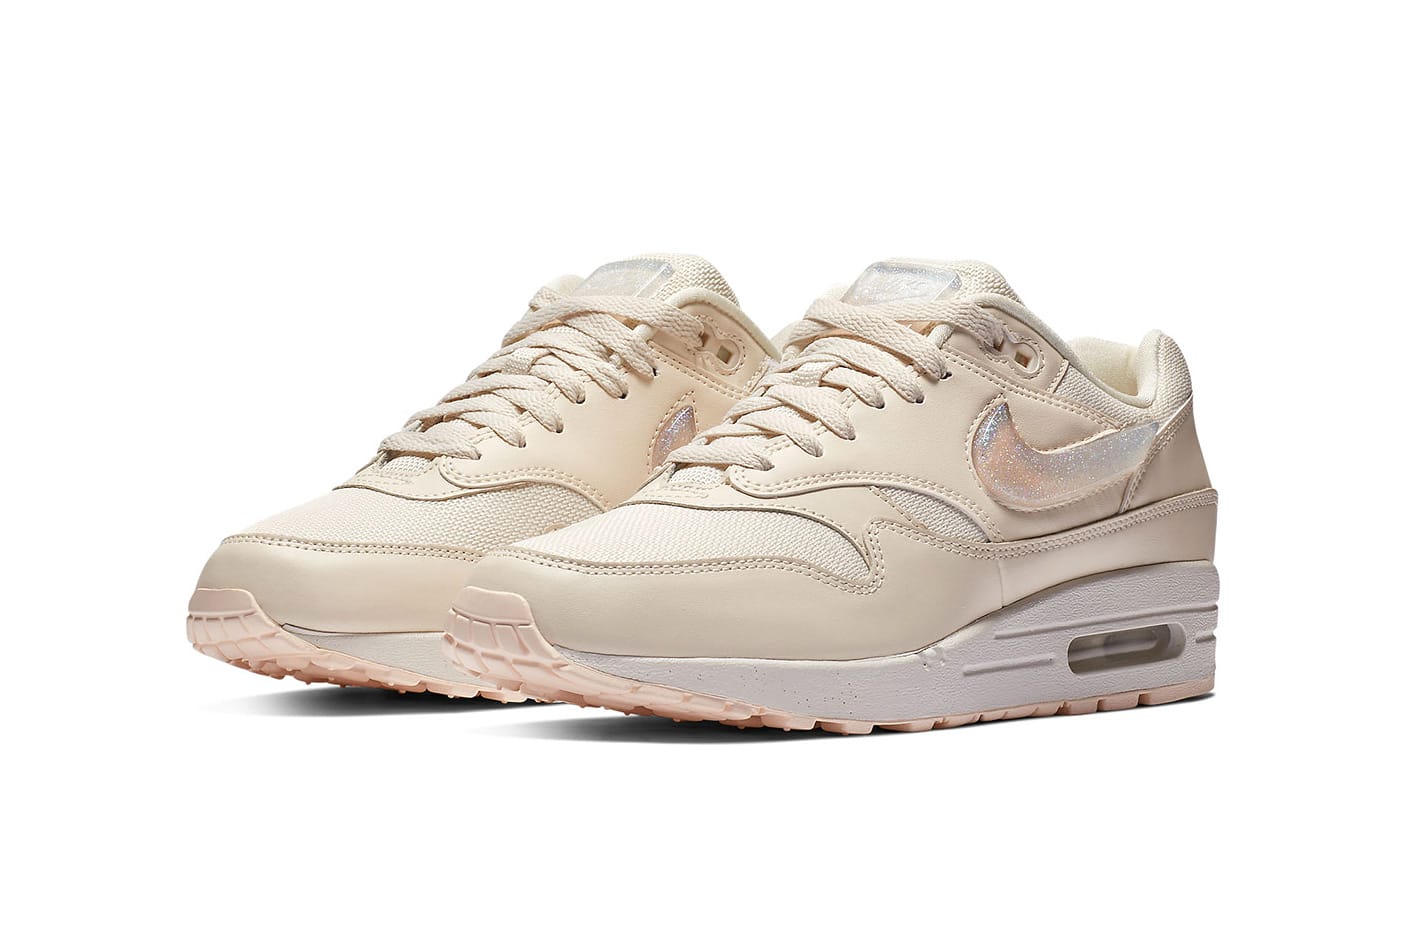 Nike Air Max 1 Updated with Giant Jewel 